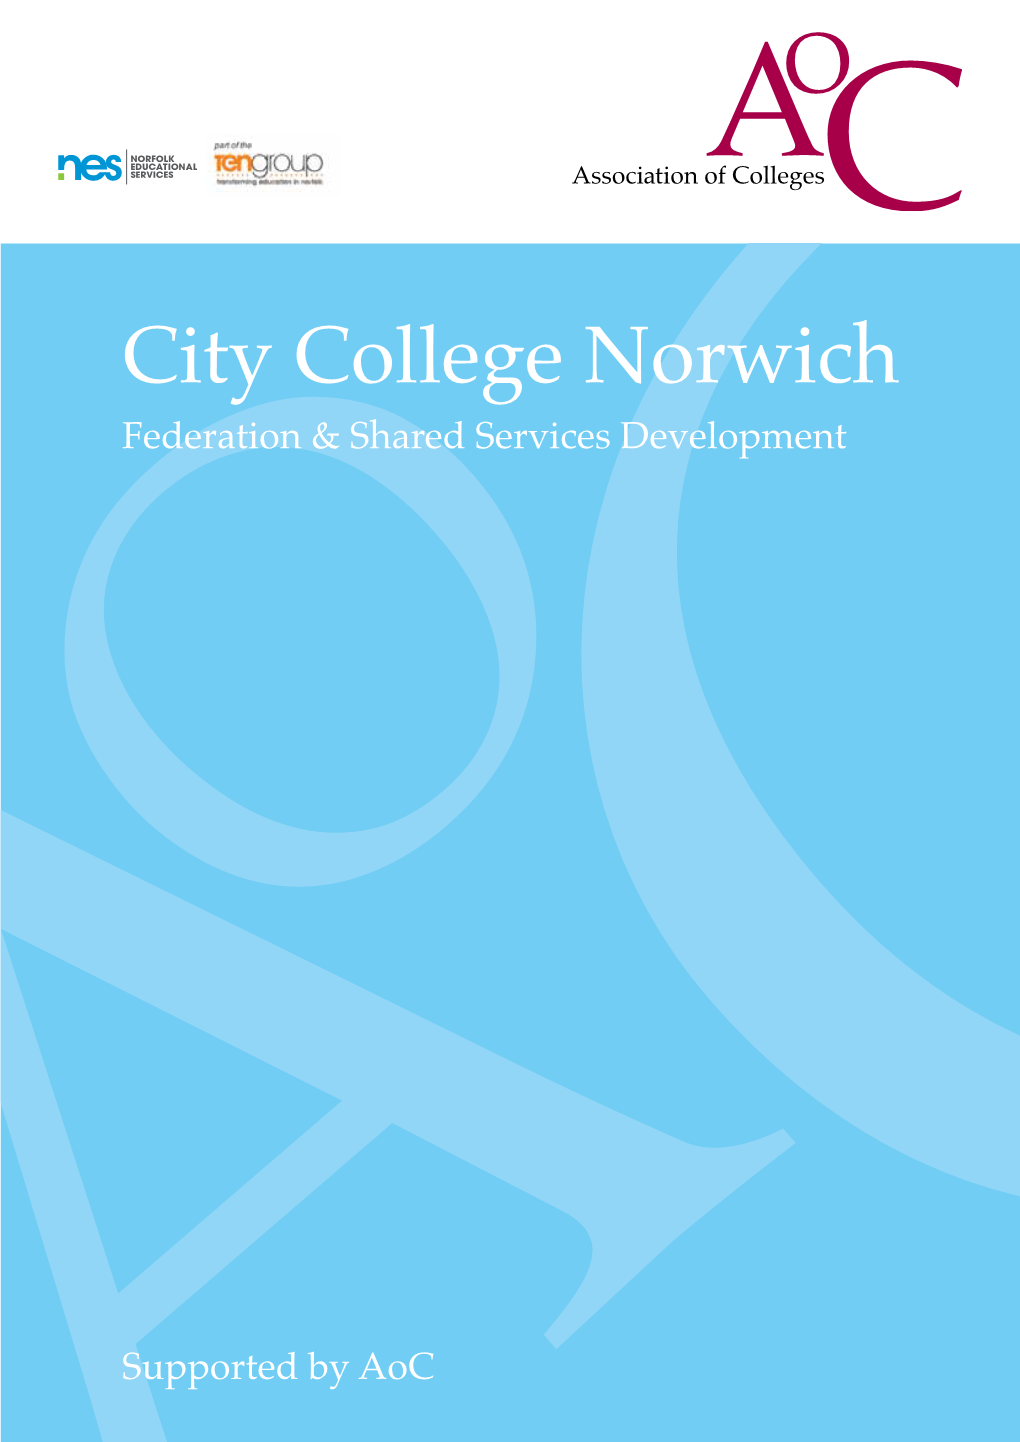 City College Norwich Federation & Shared Services Development